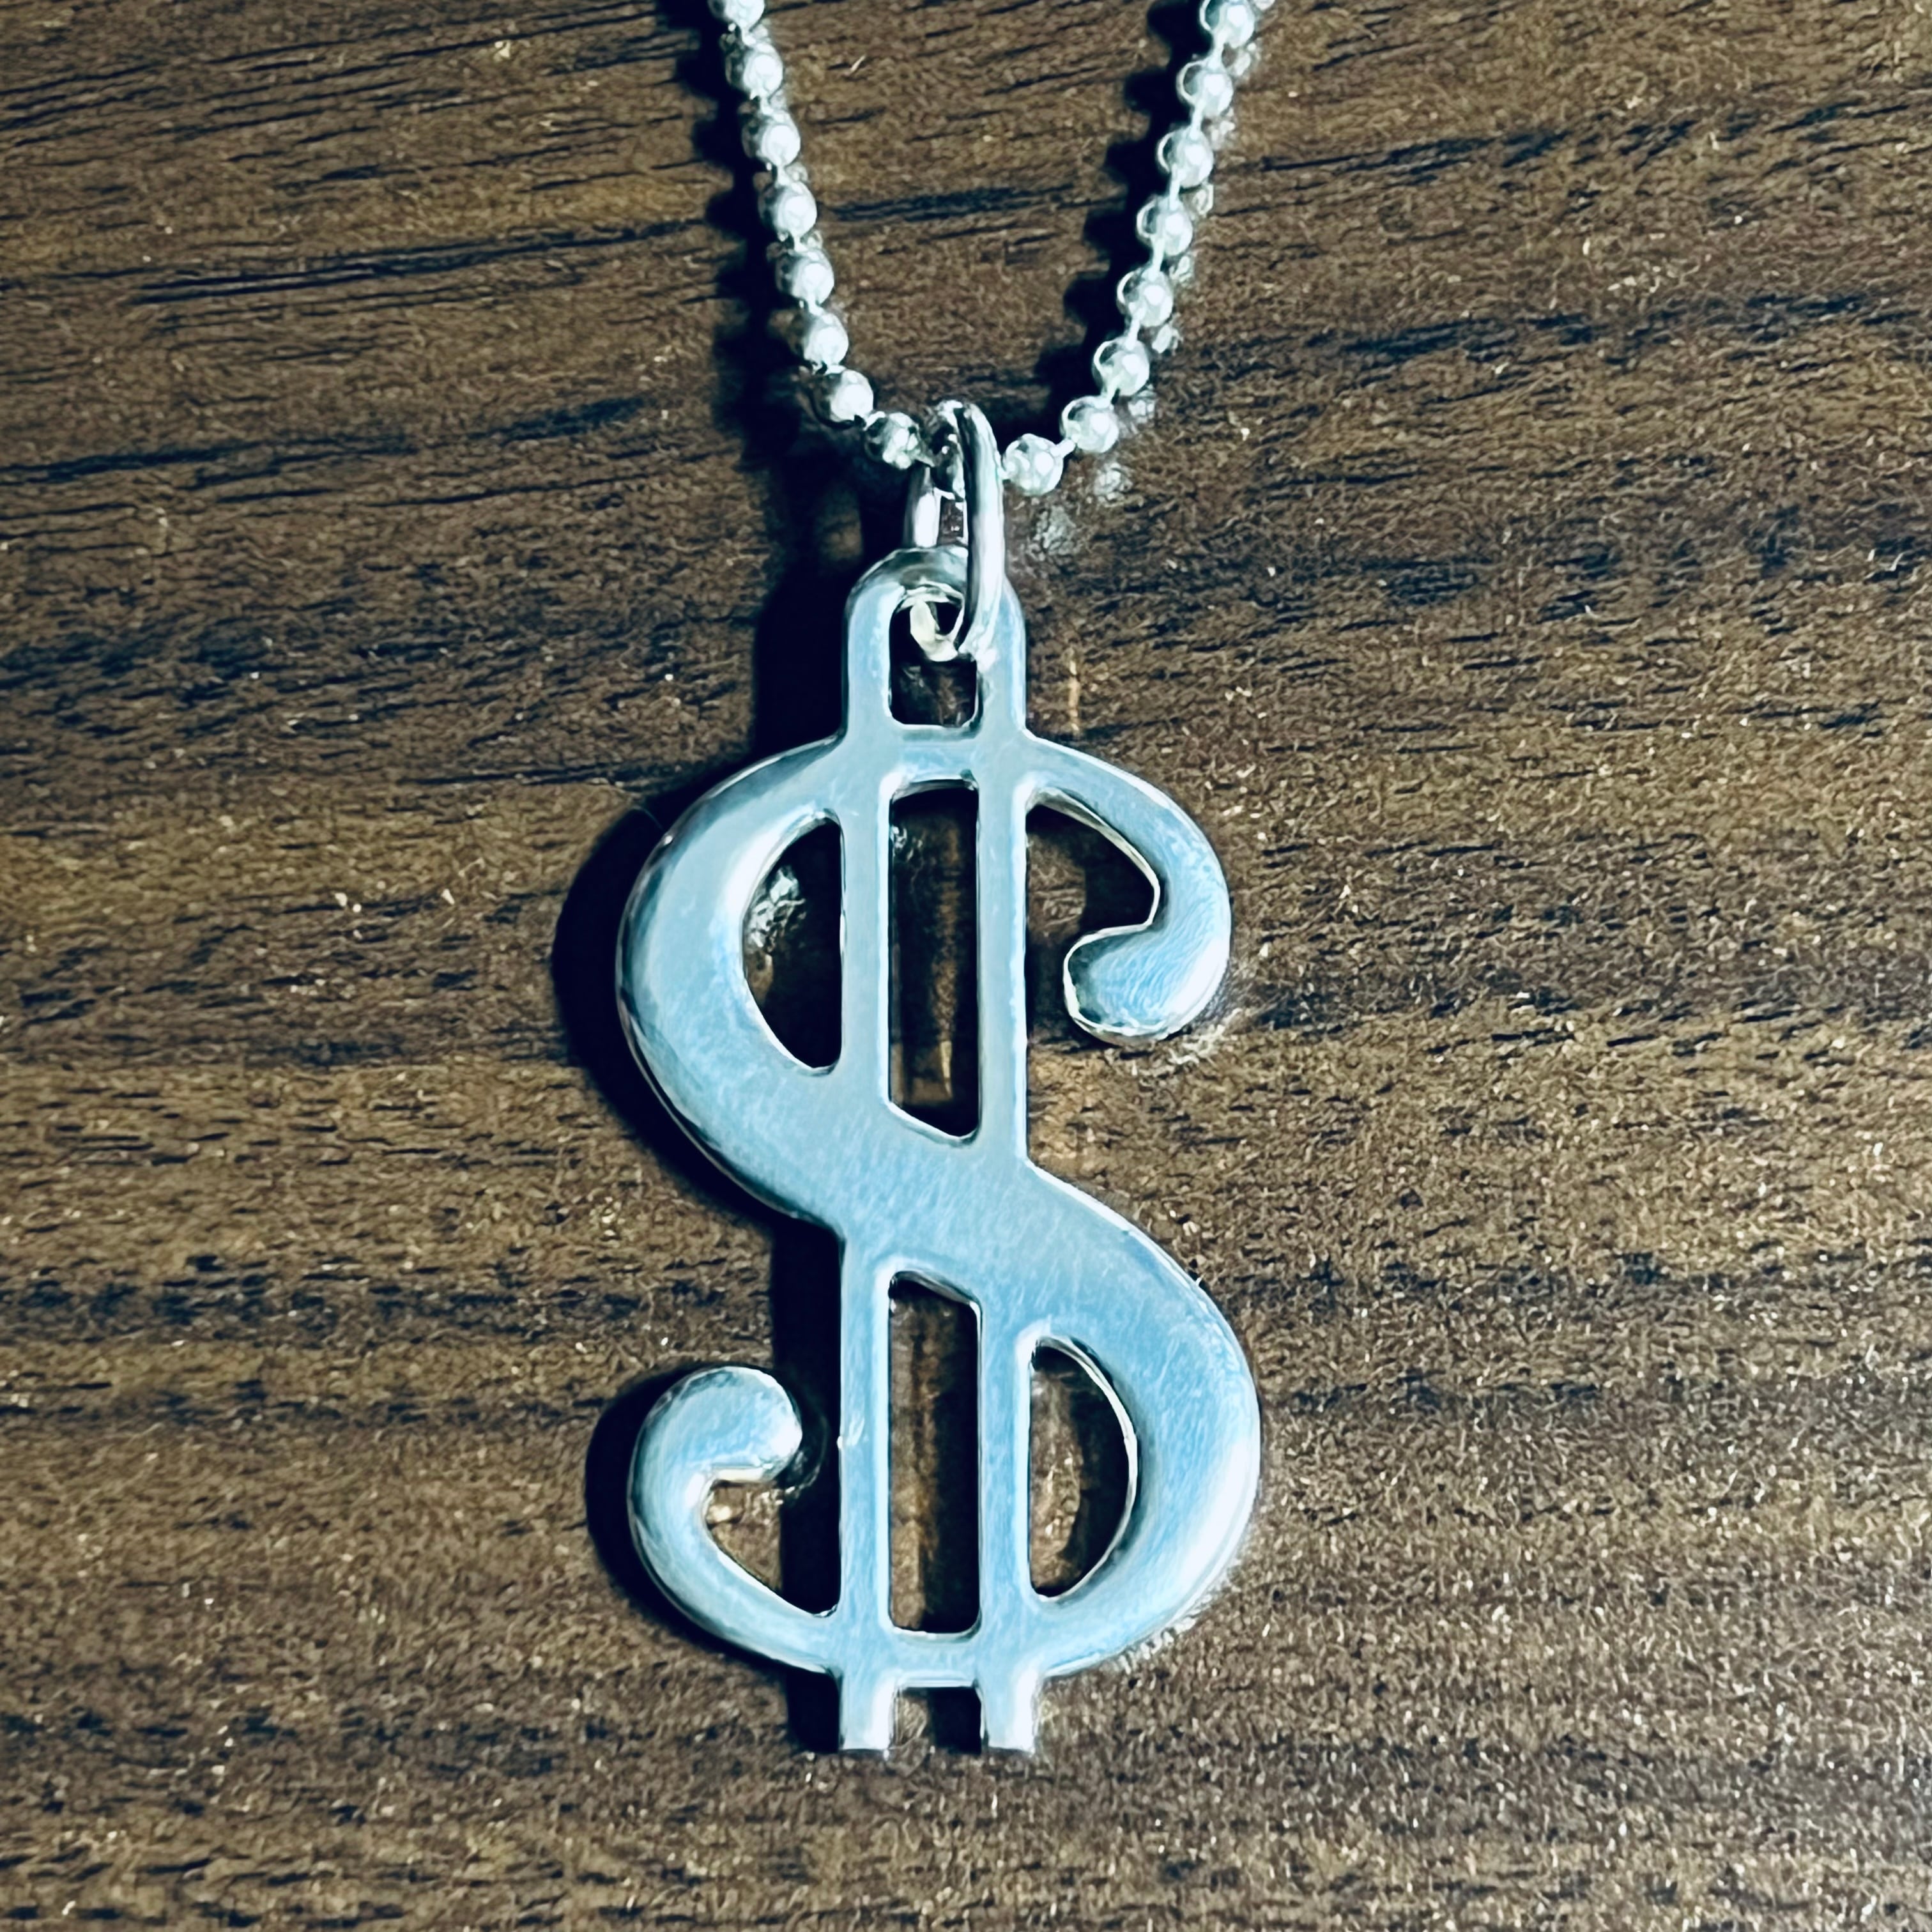 OLD TIFFANY & CO. Dollar Sign Pendant Long Necklace Sterling